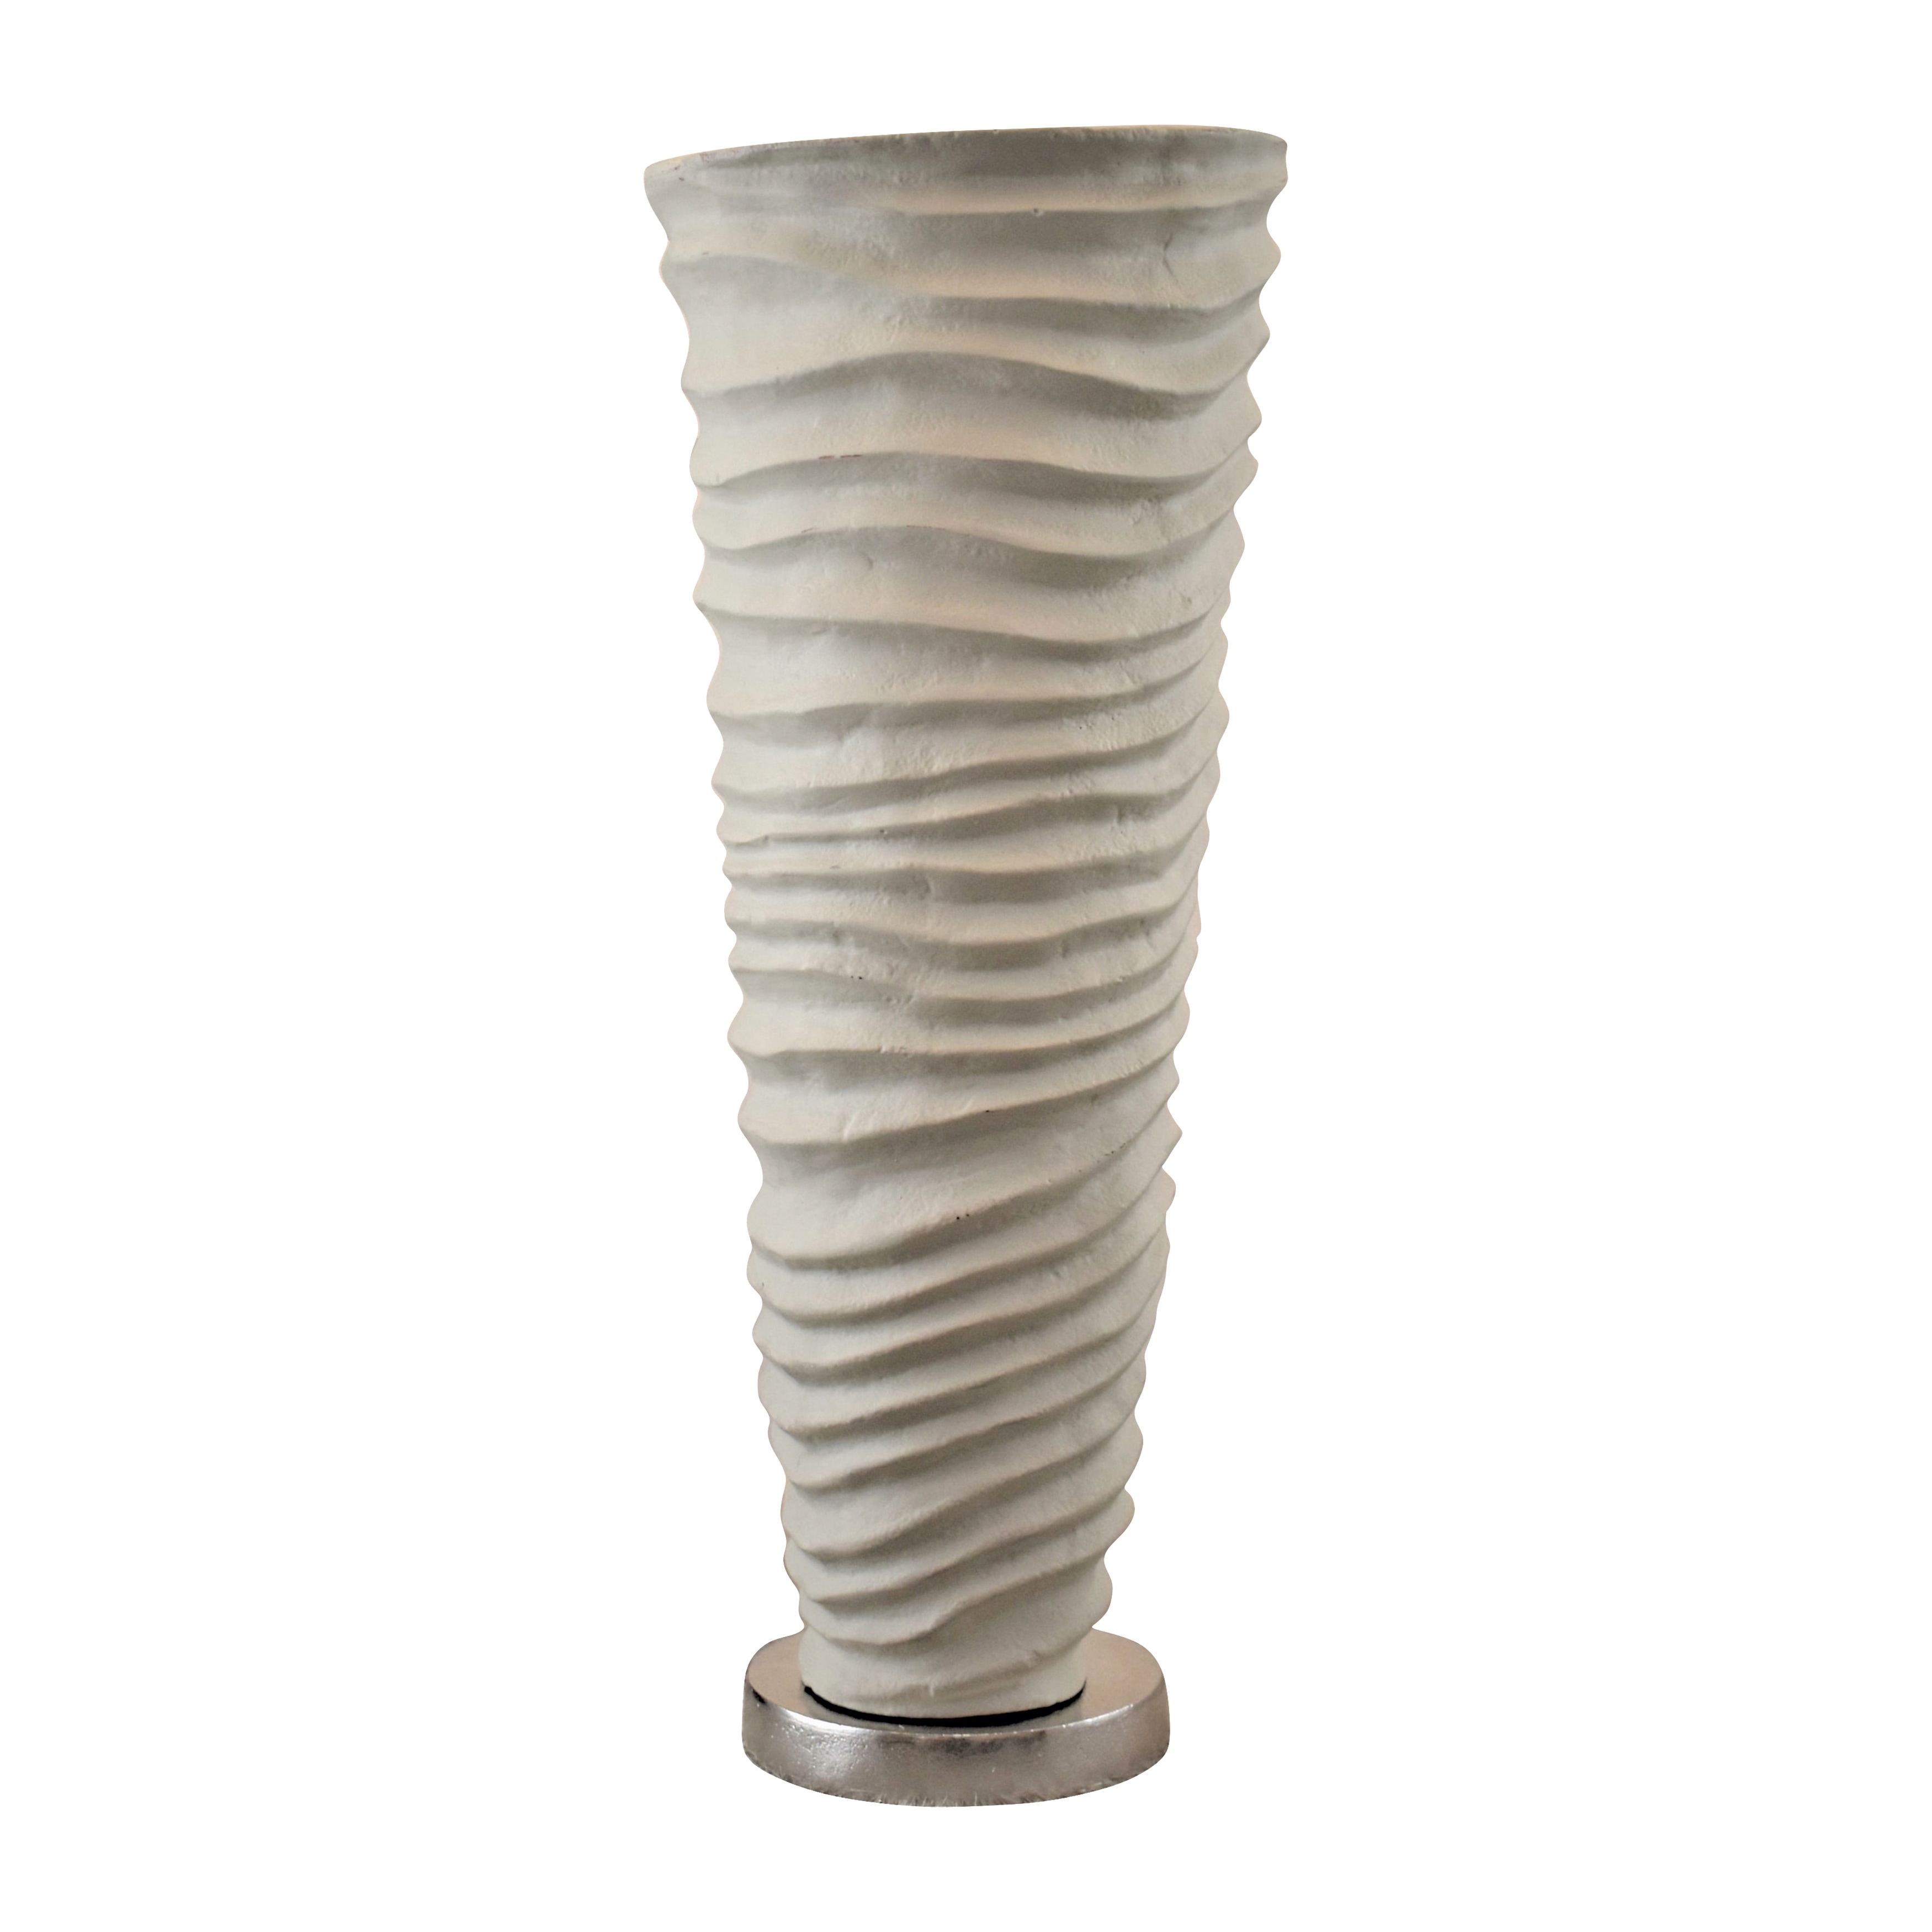 15"Hx6" Diameter, Metal Vase, Ivory/Nickel Finish, Made with Aluminum, Rugged Sand Ripple Design, Ideal for Home